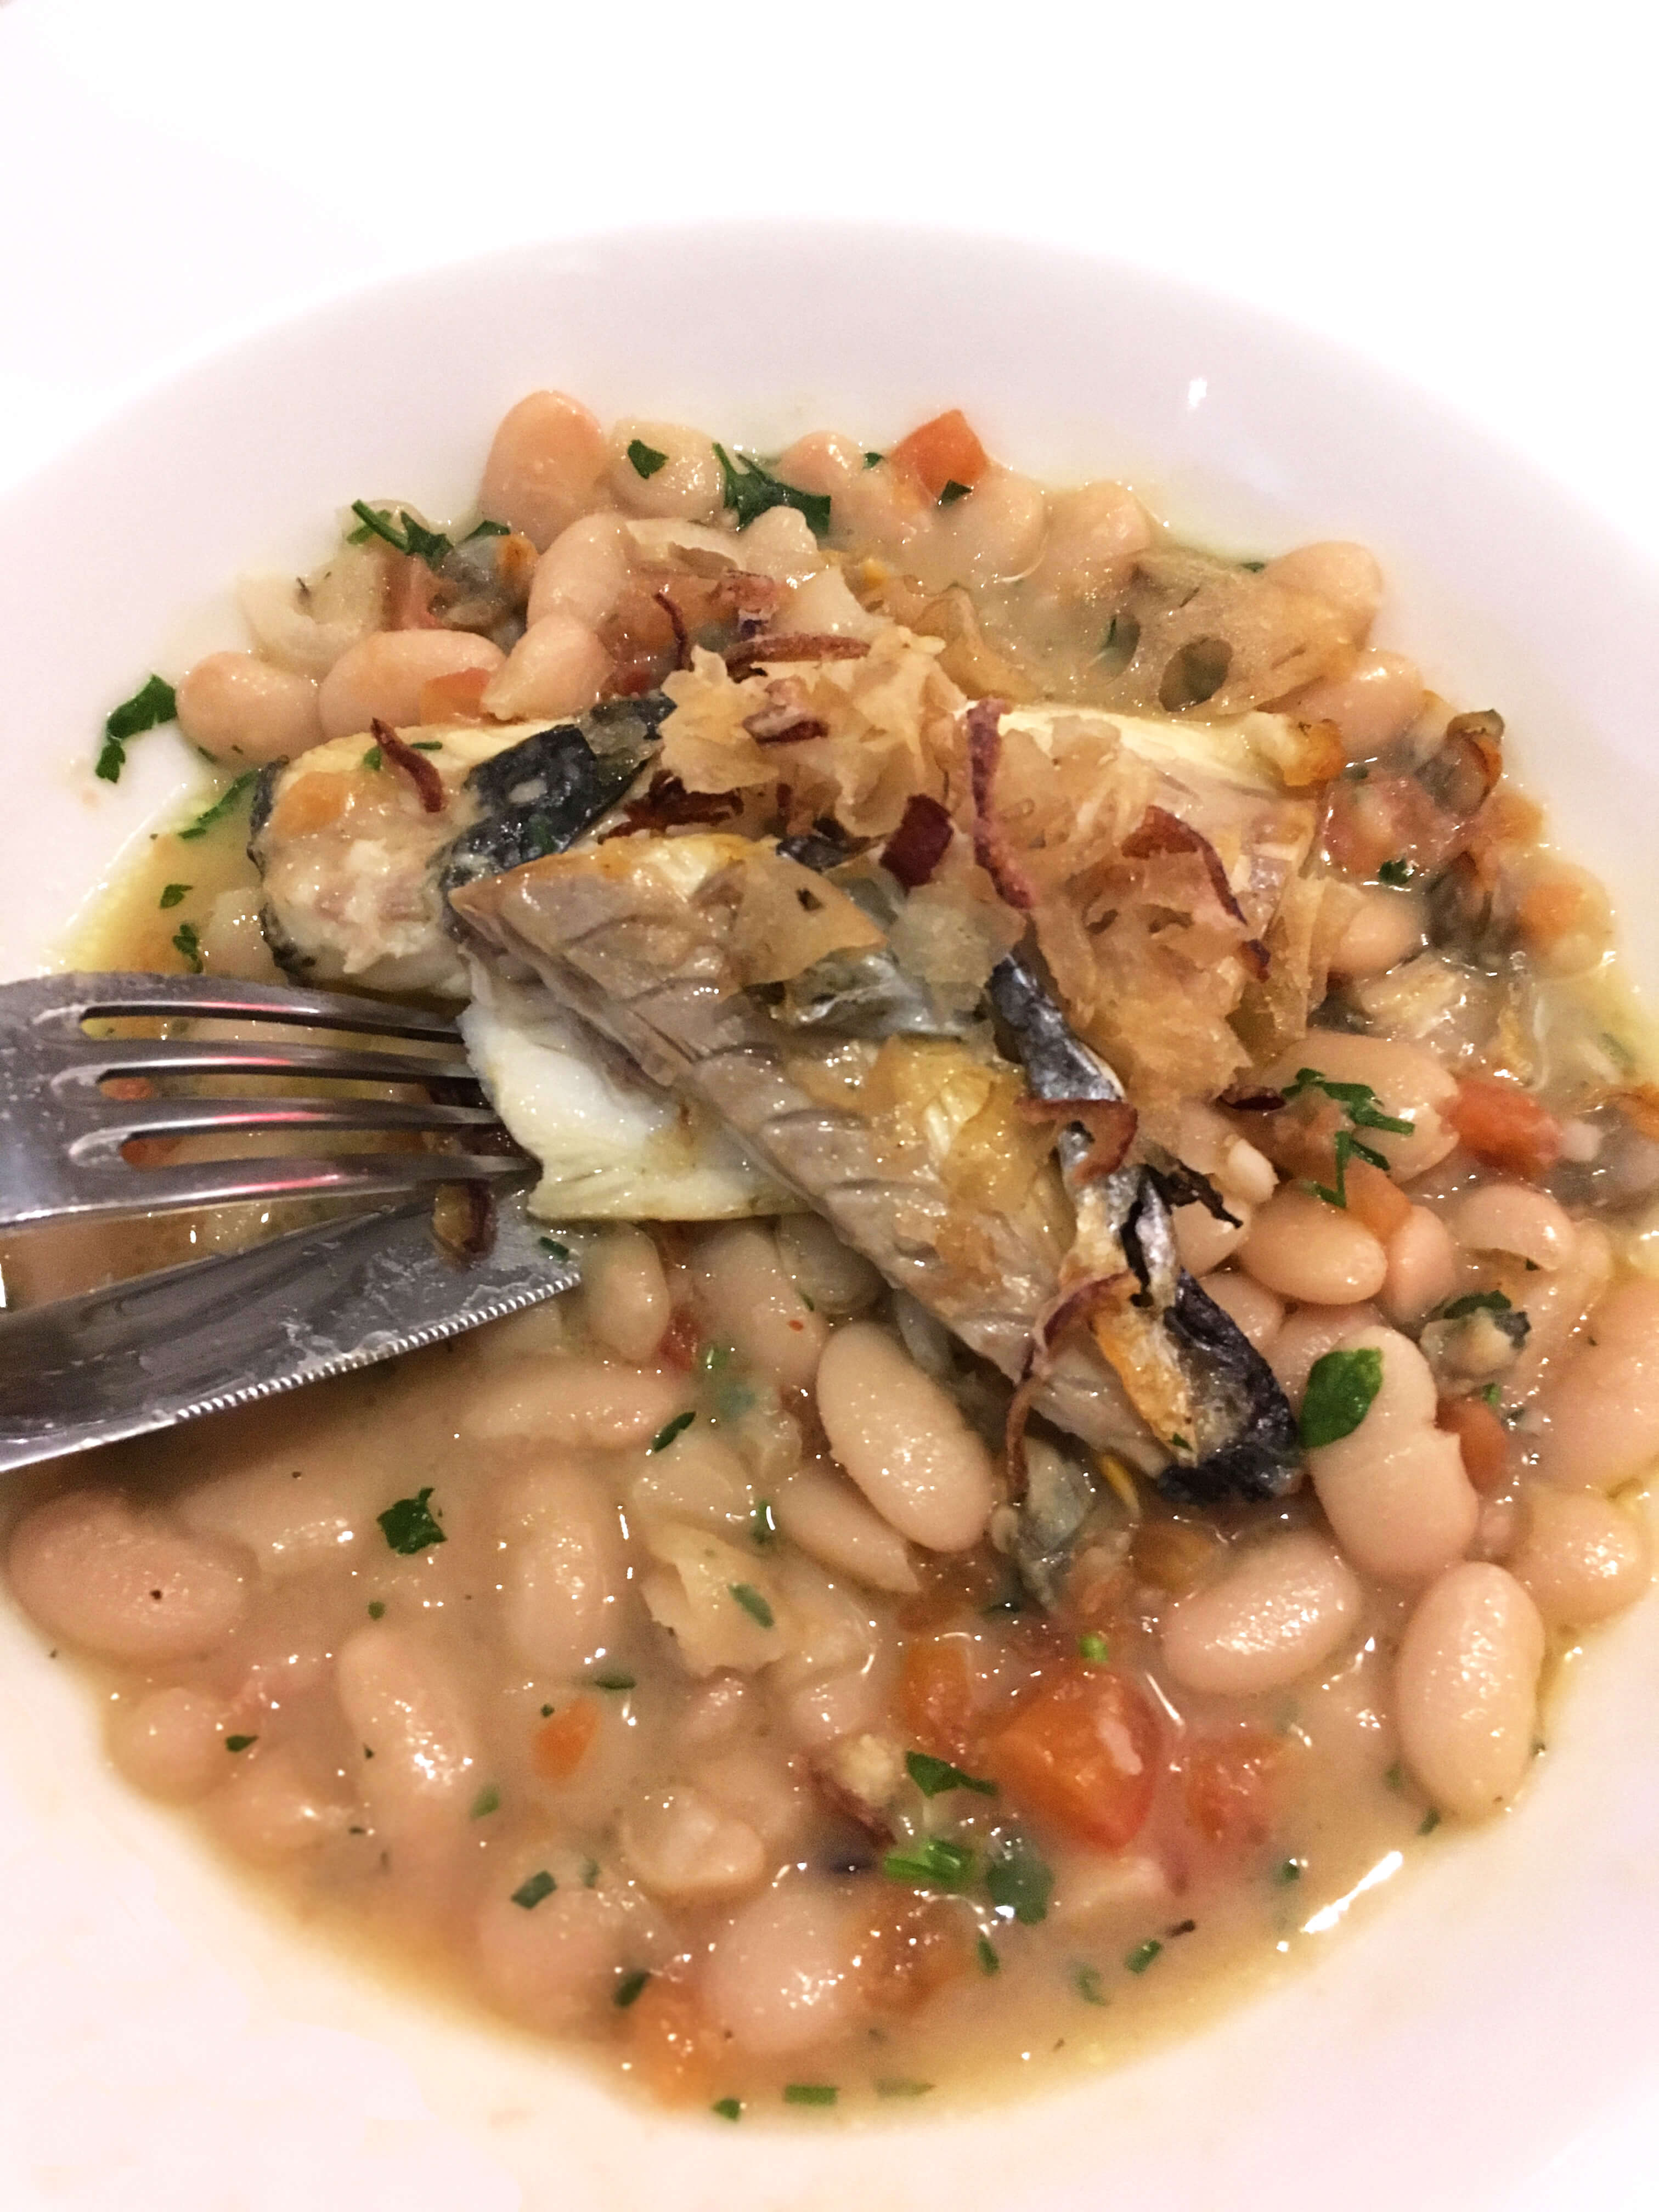 Sea bass filets, served with butter beans and clams